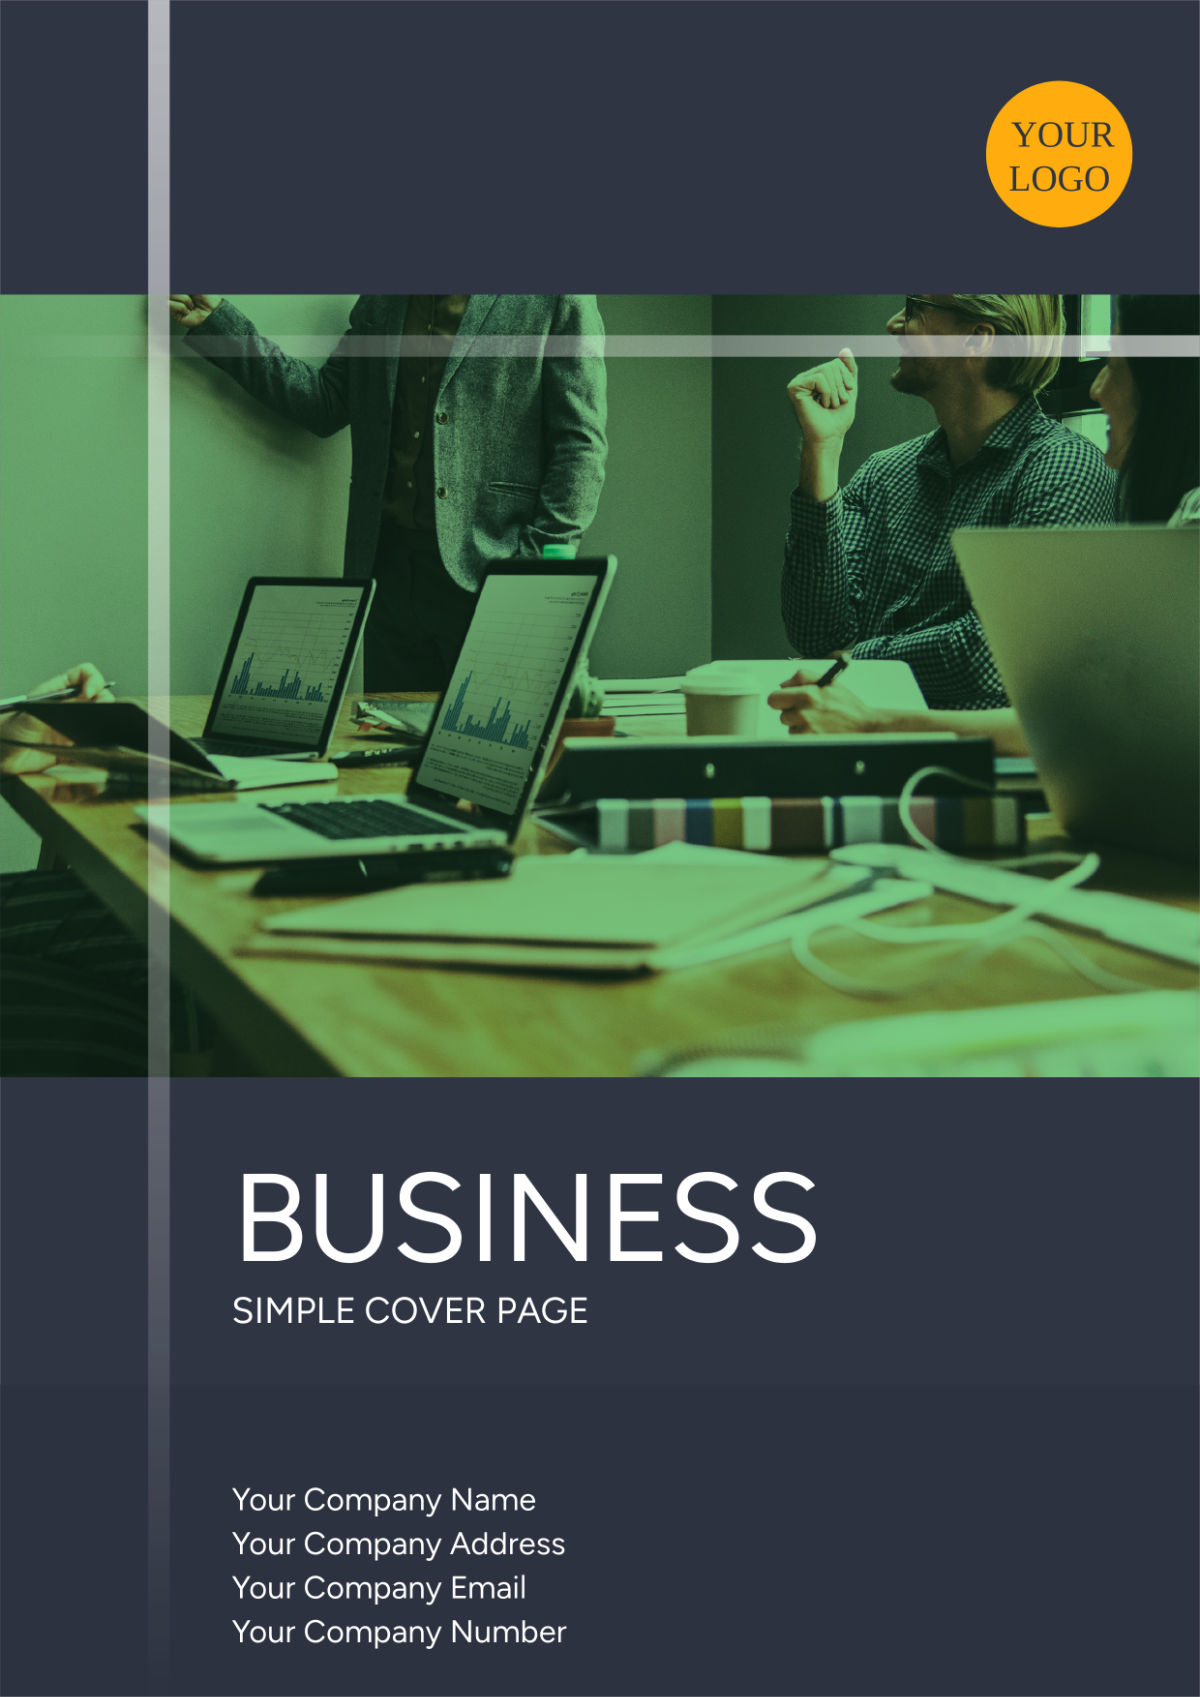 Business Simple Cover Page